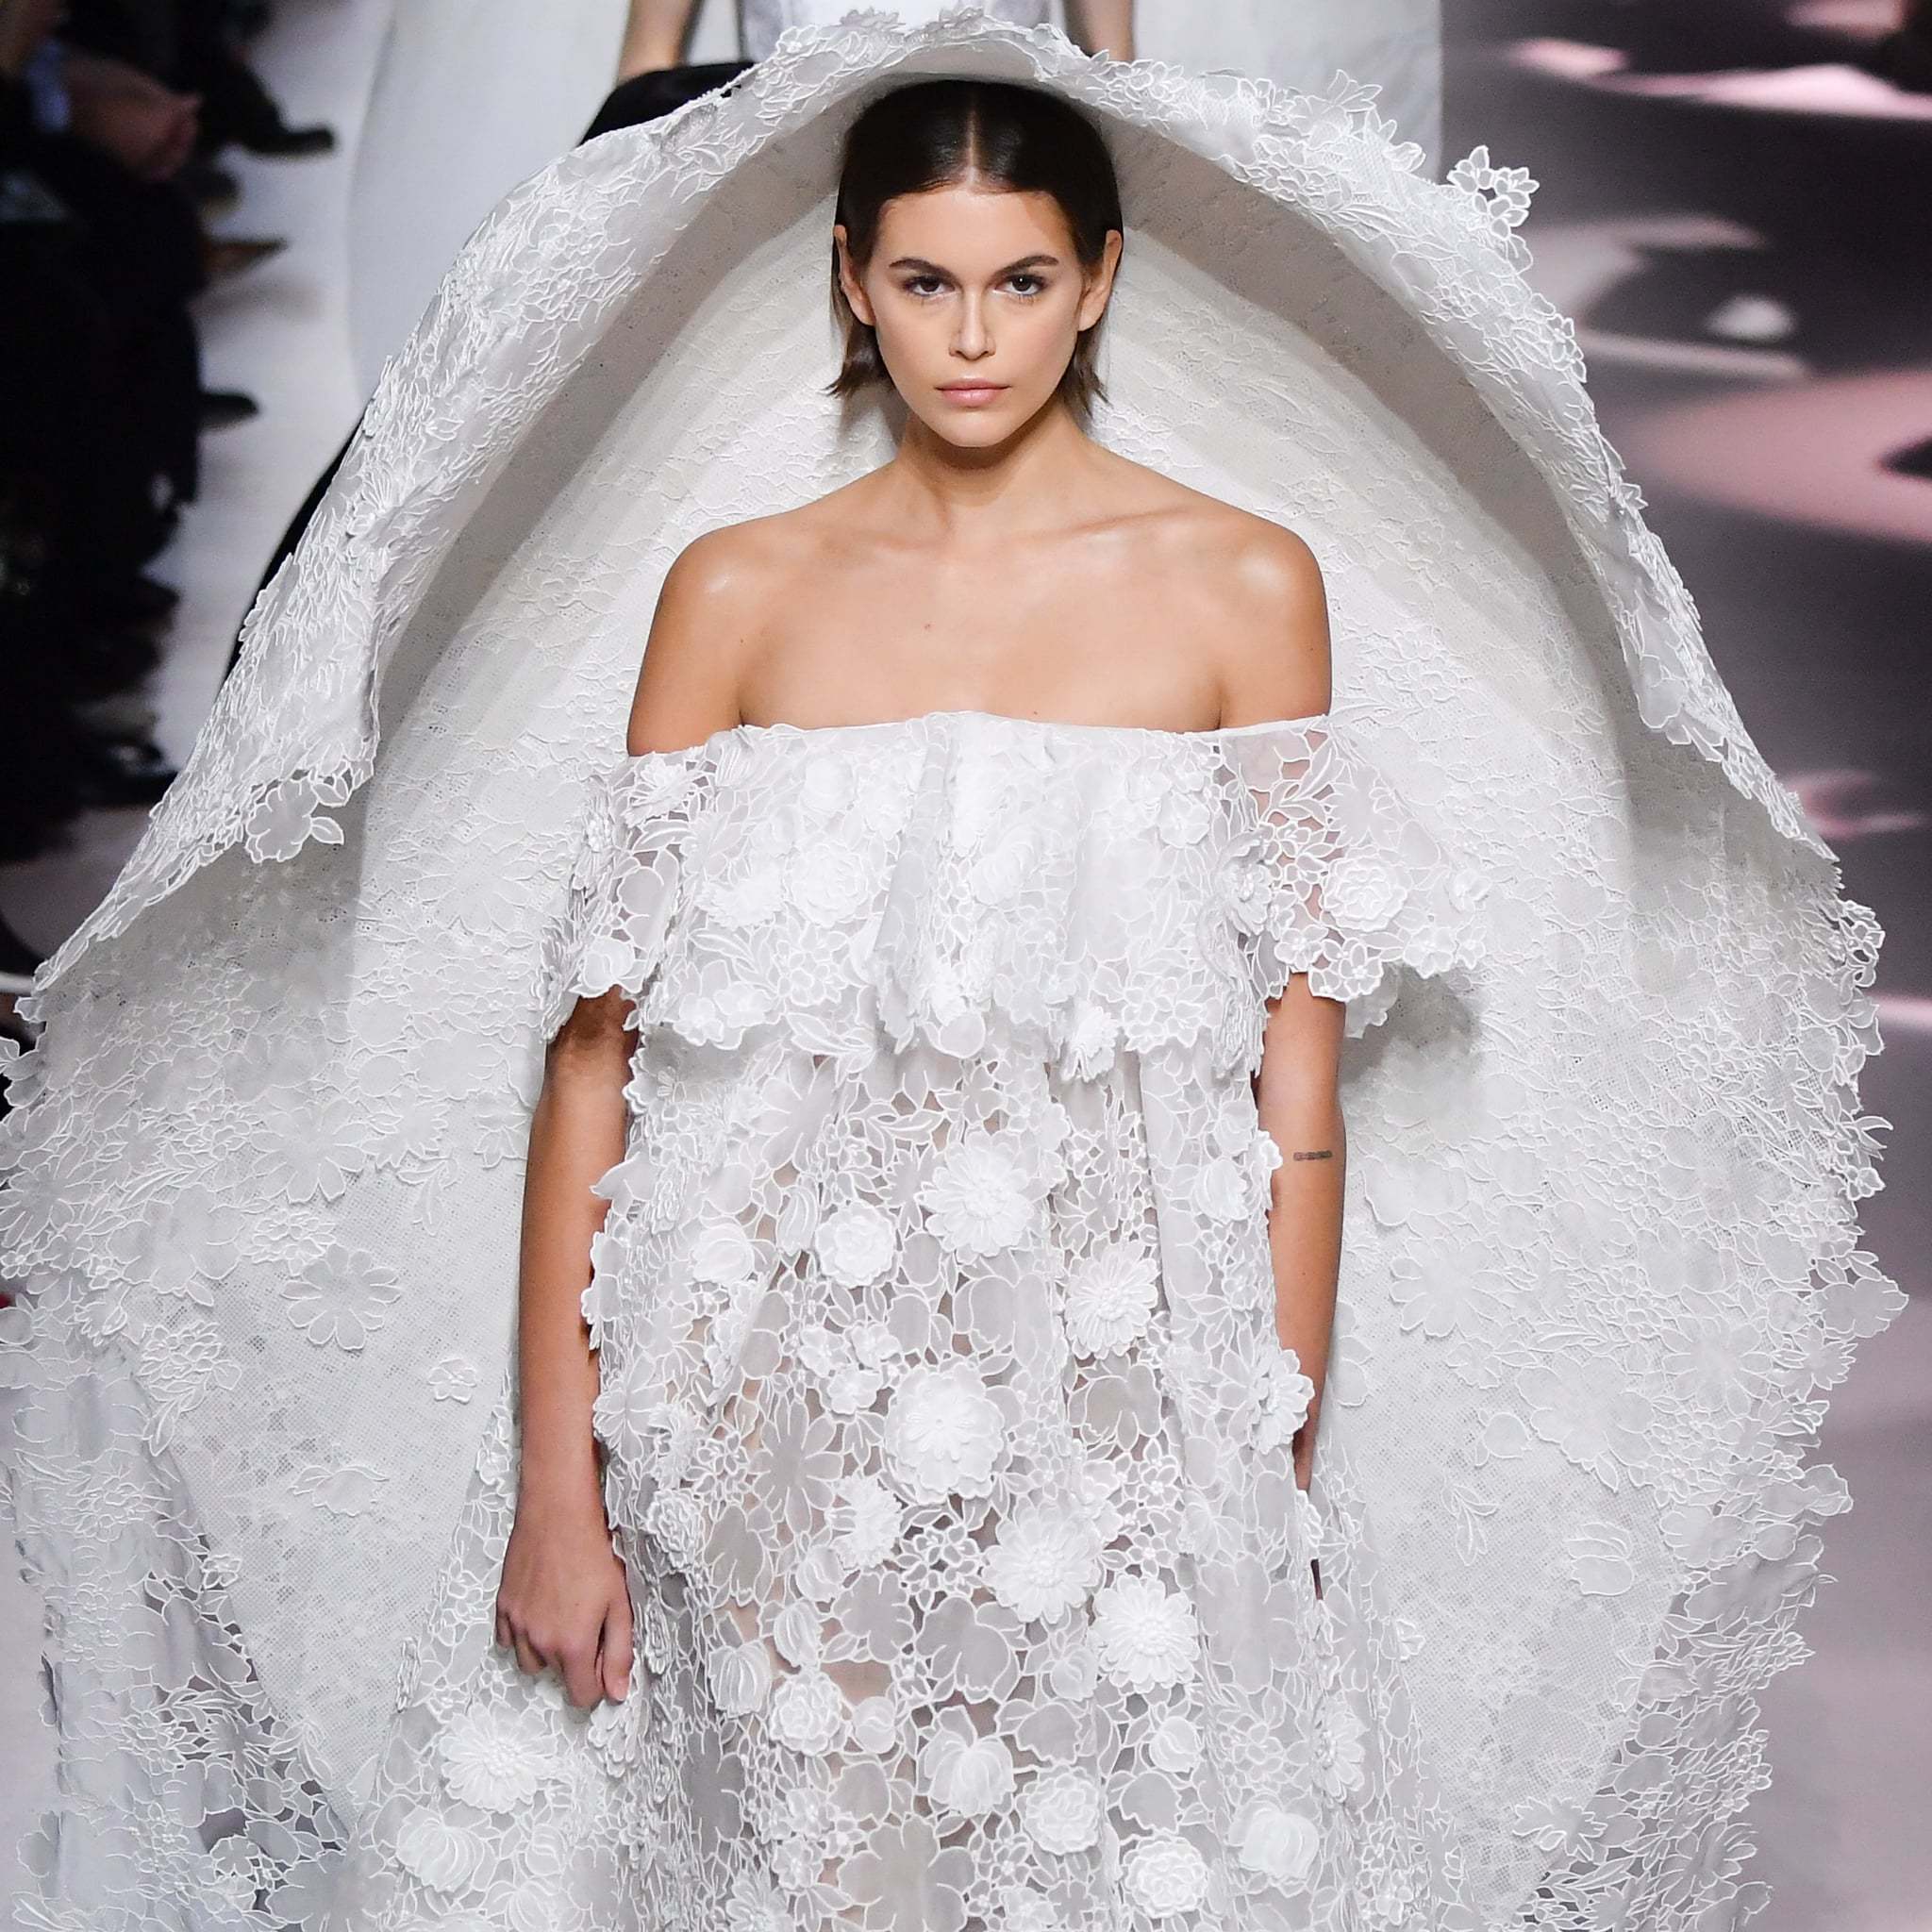 givenchy wedding gowns